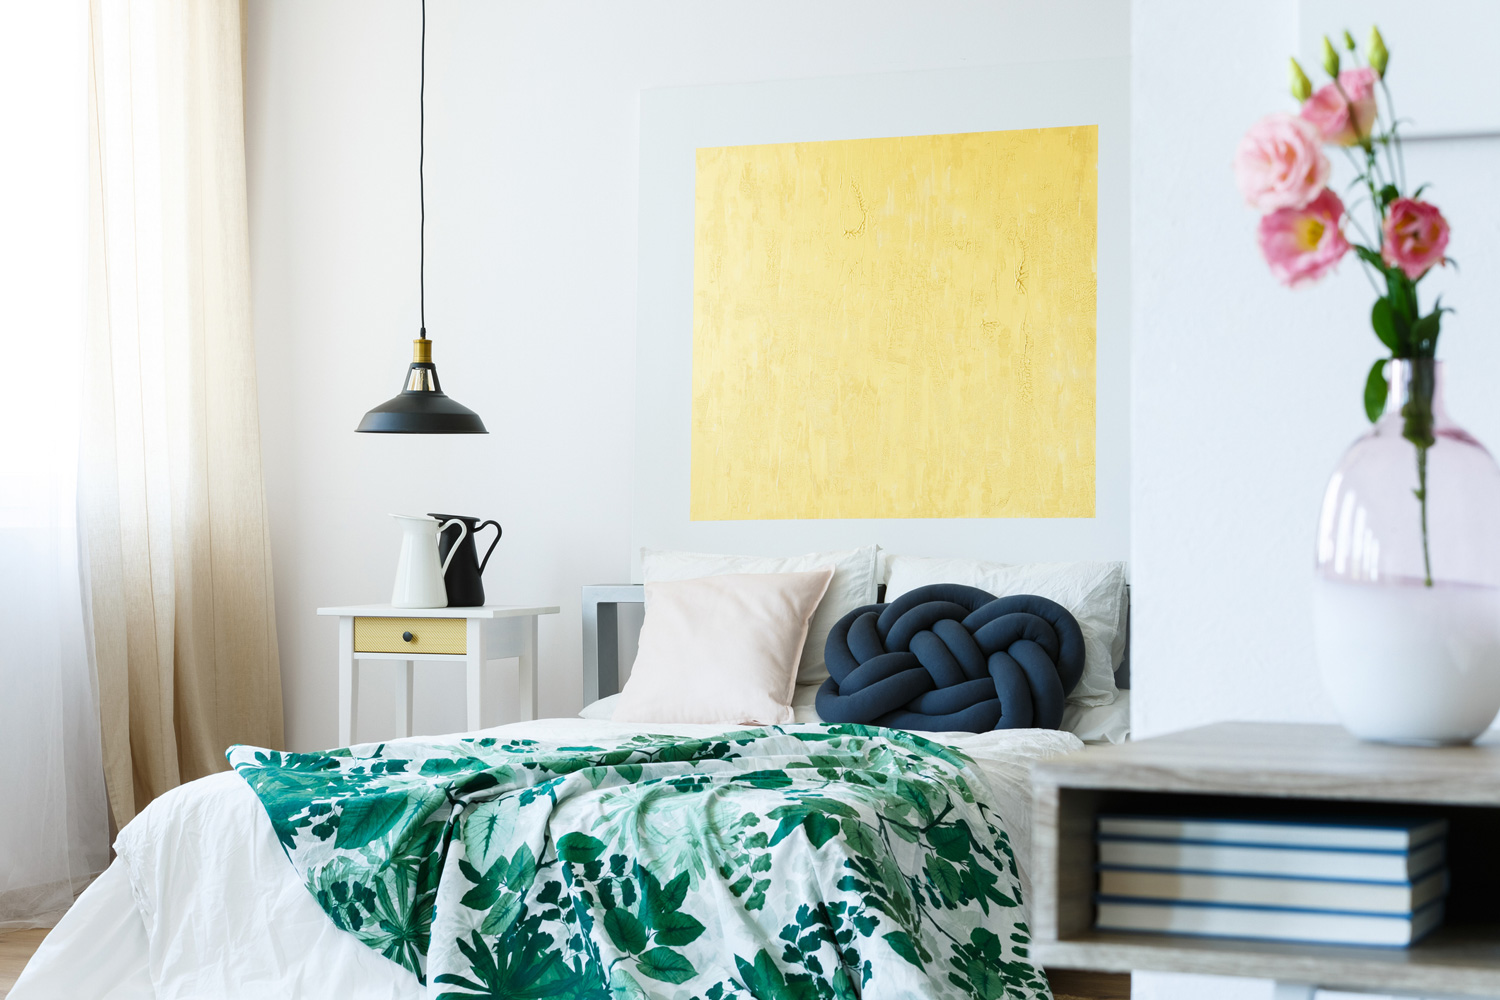 Guest bedroom with green tropical bedding and yellow artwork